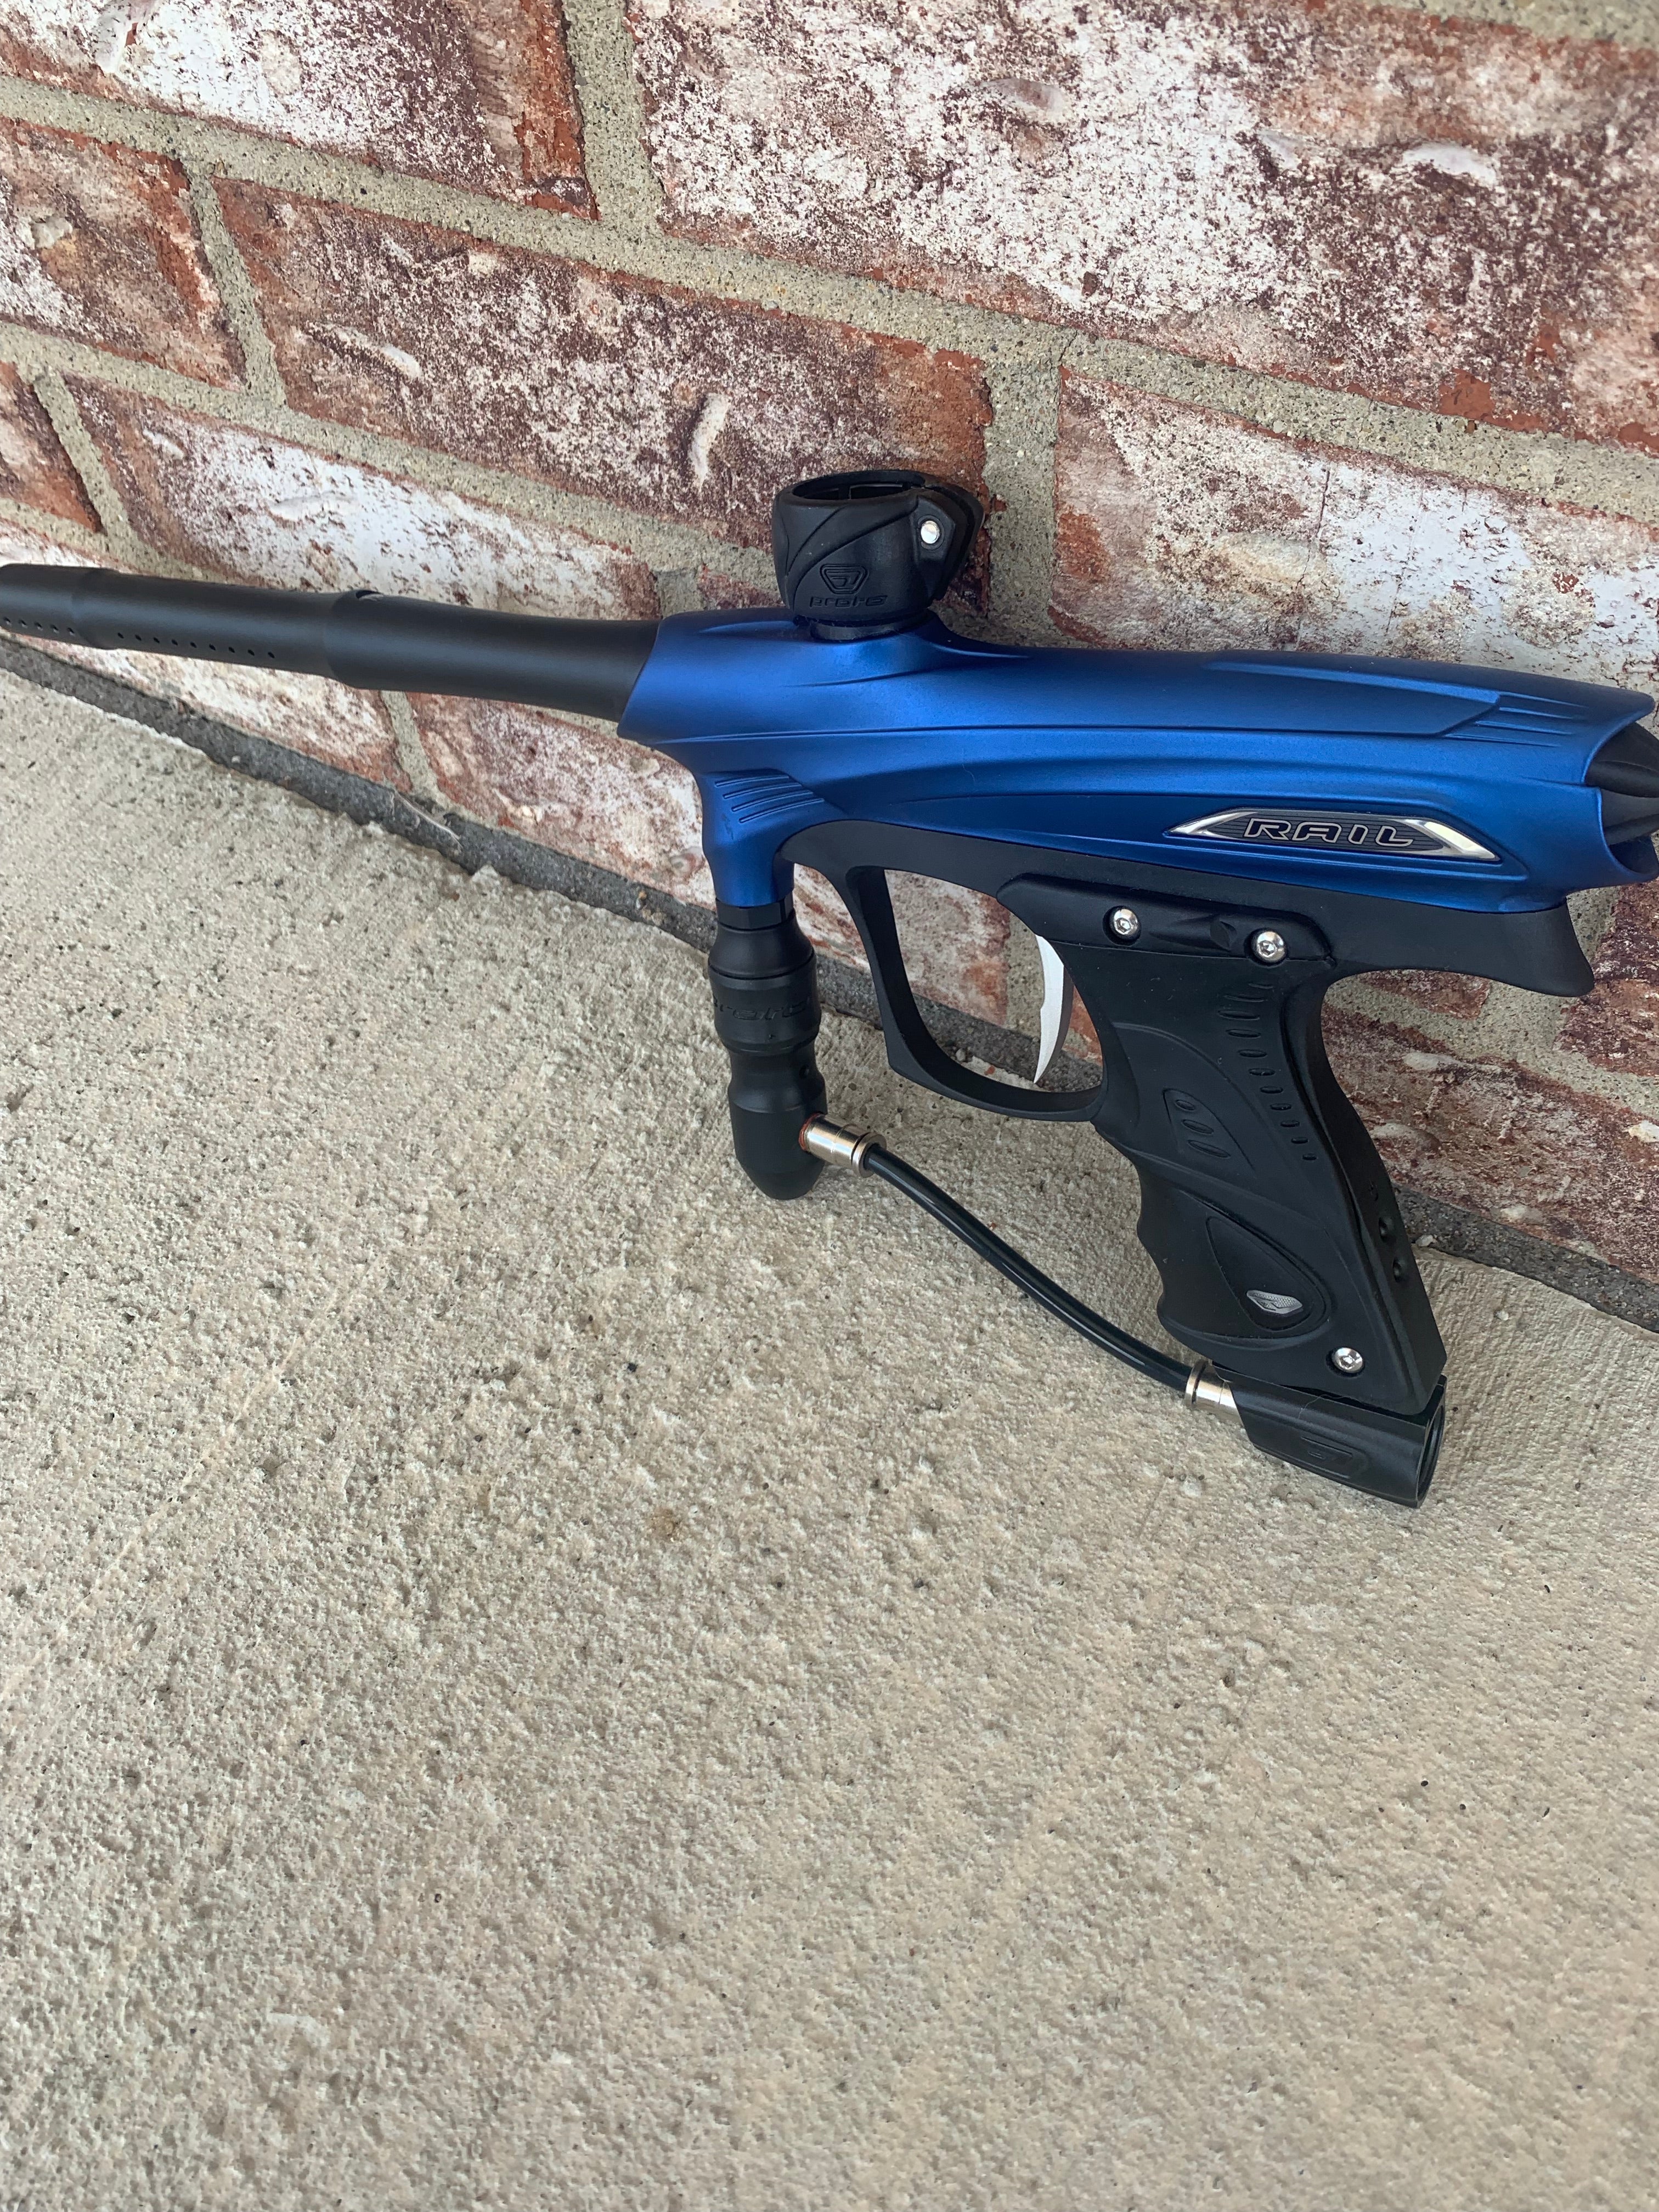 Used Dye Proto Rize Paintball Marker- Blue